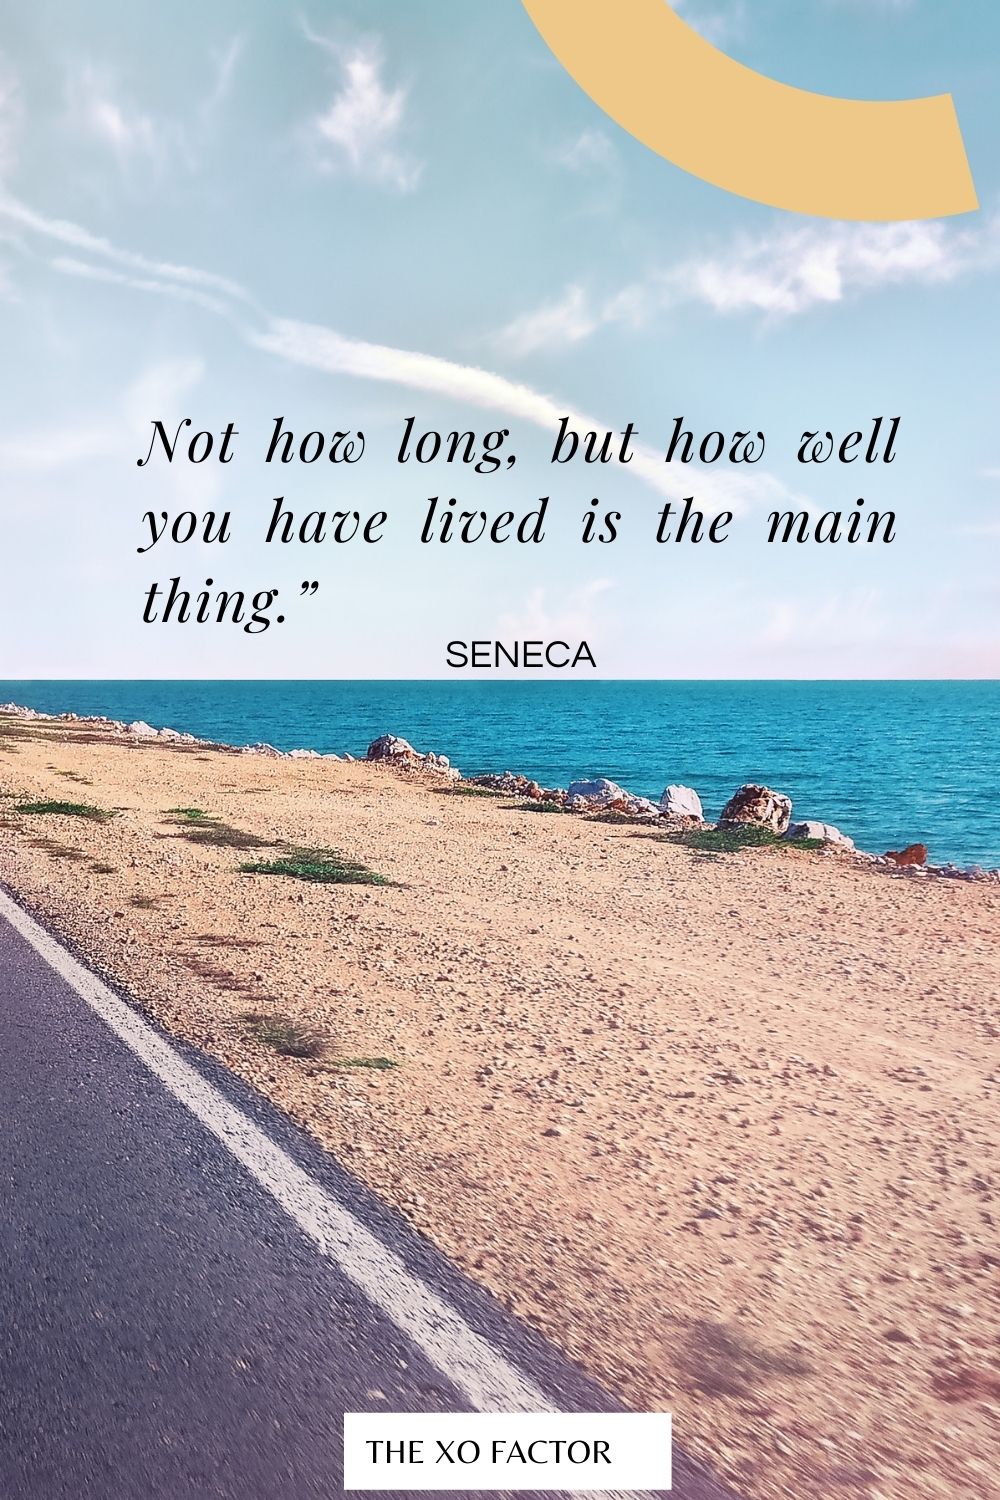 Not how long, but how well you have lived is the main thing.”  Seneca